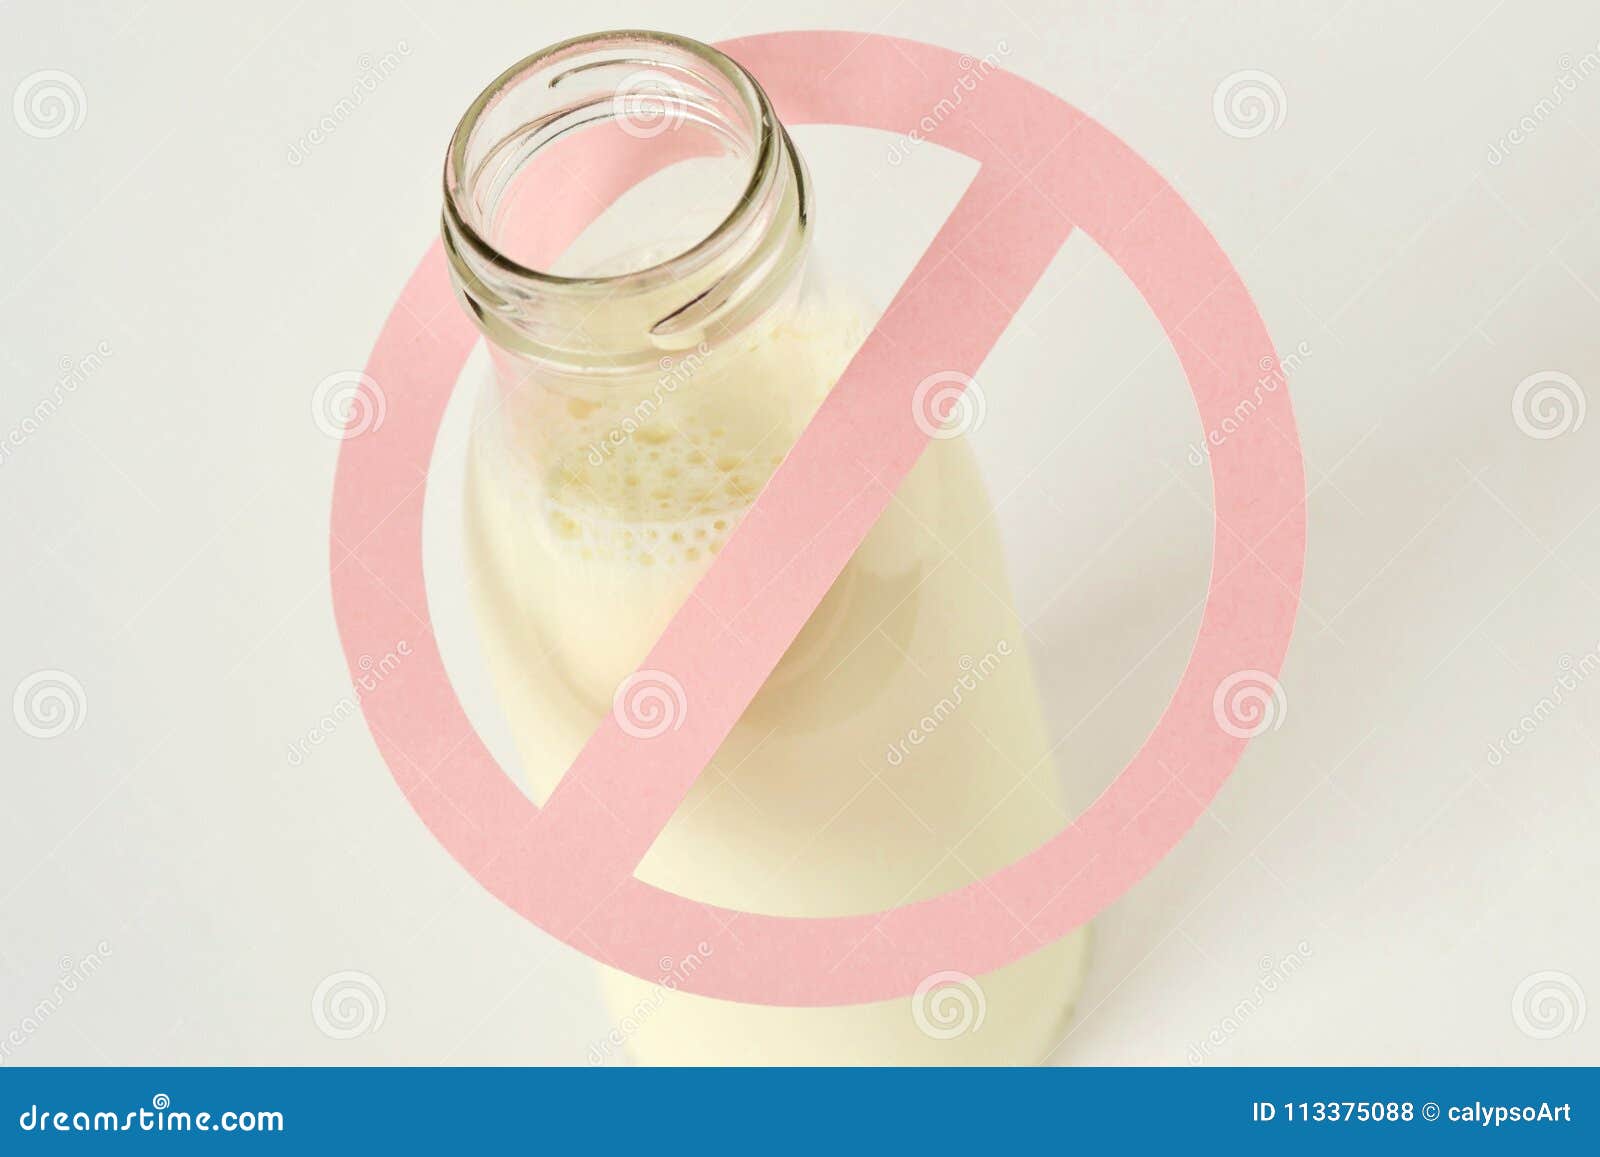 glass bottle of milk with restriction sign - lactose intolerance